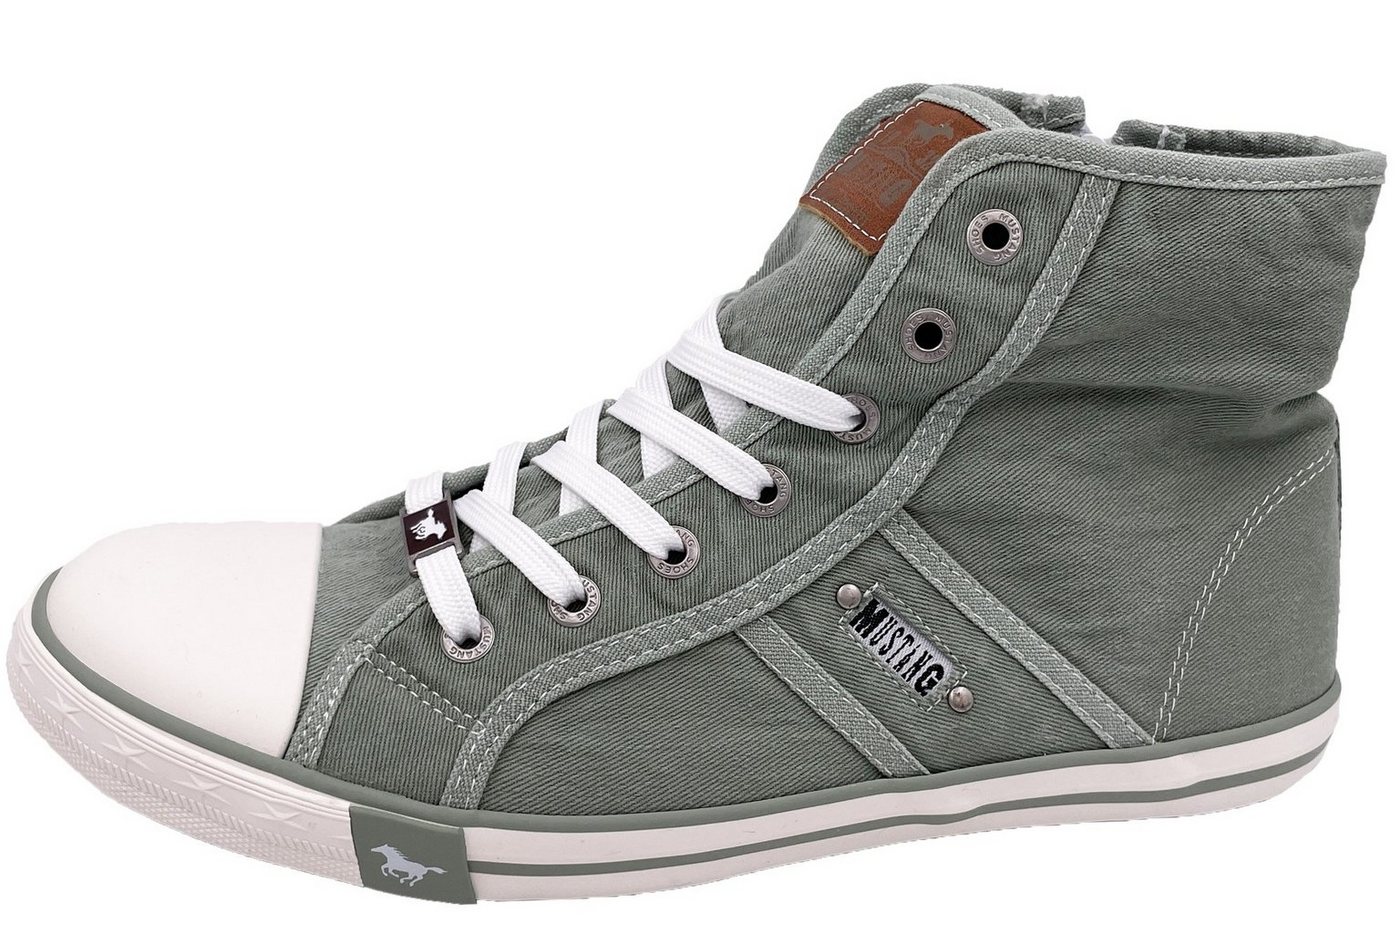 Mustang Shoes 1099-502-750 Sneaker von Mustang Shoes